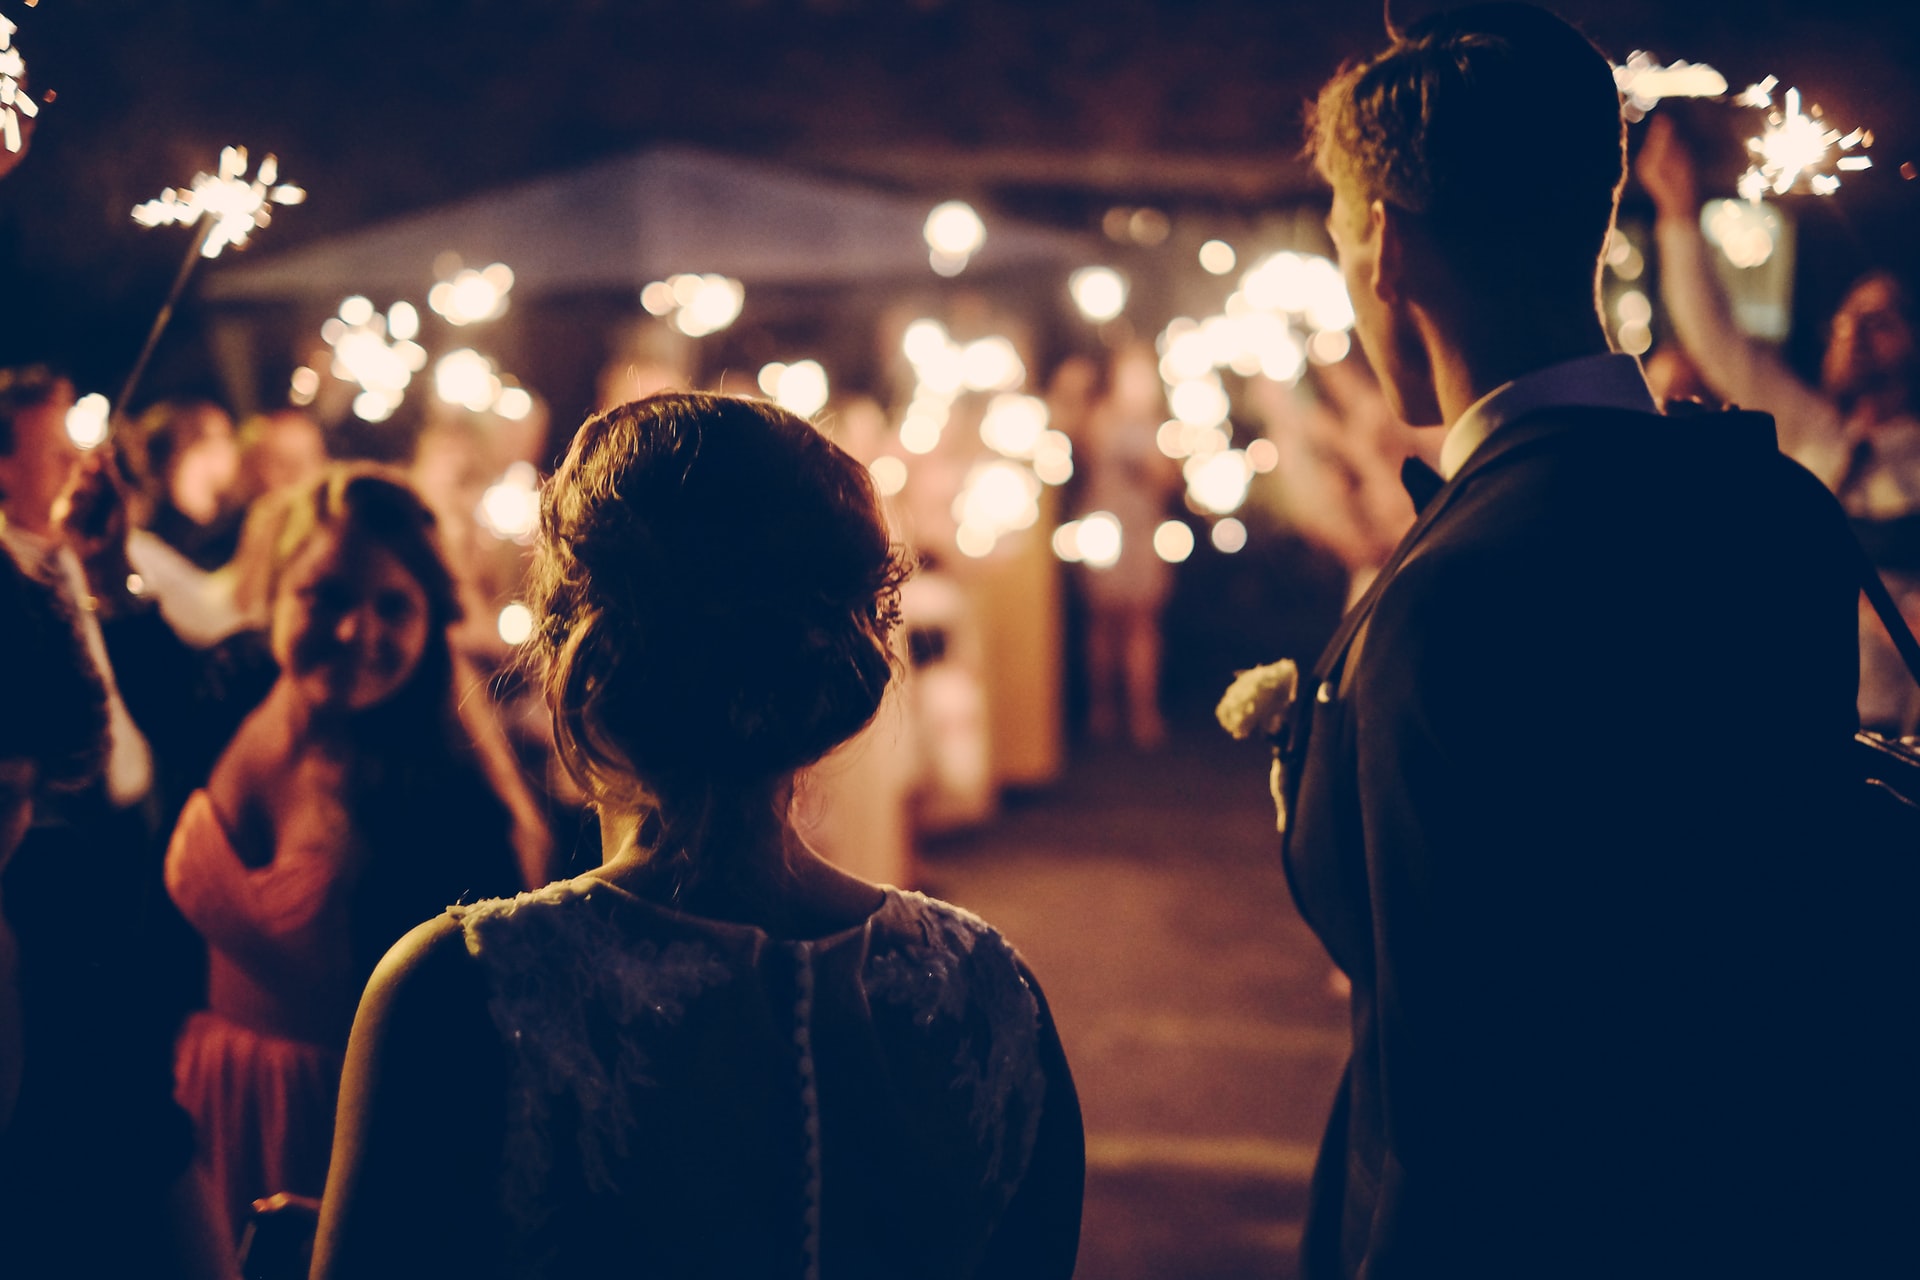 5 Reasons Couples Don’t Hire A Wedding Planner